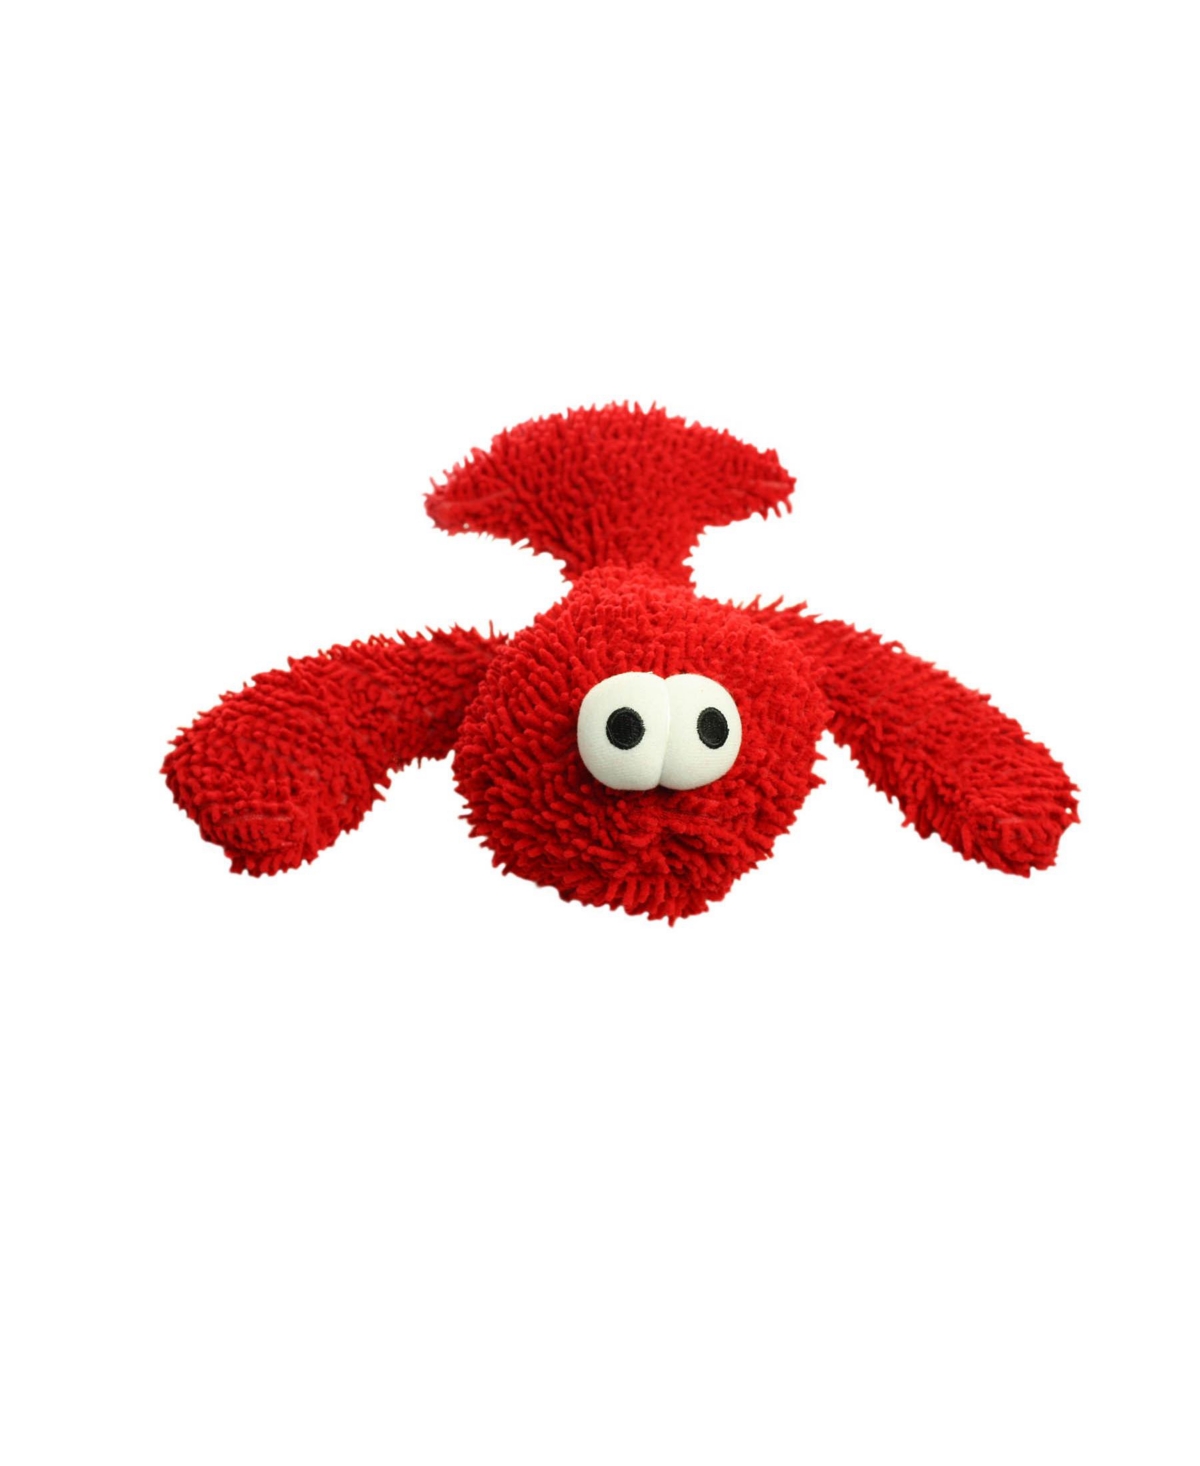 Microfiber Ball Lobster, Dog Toy - Red